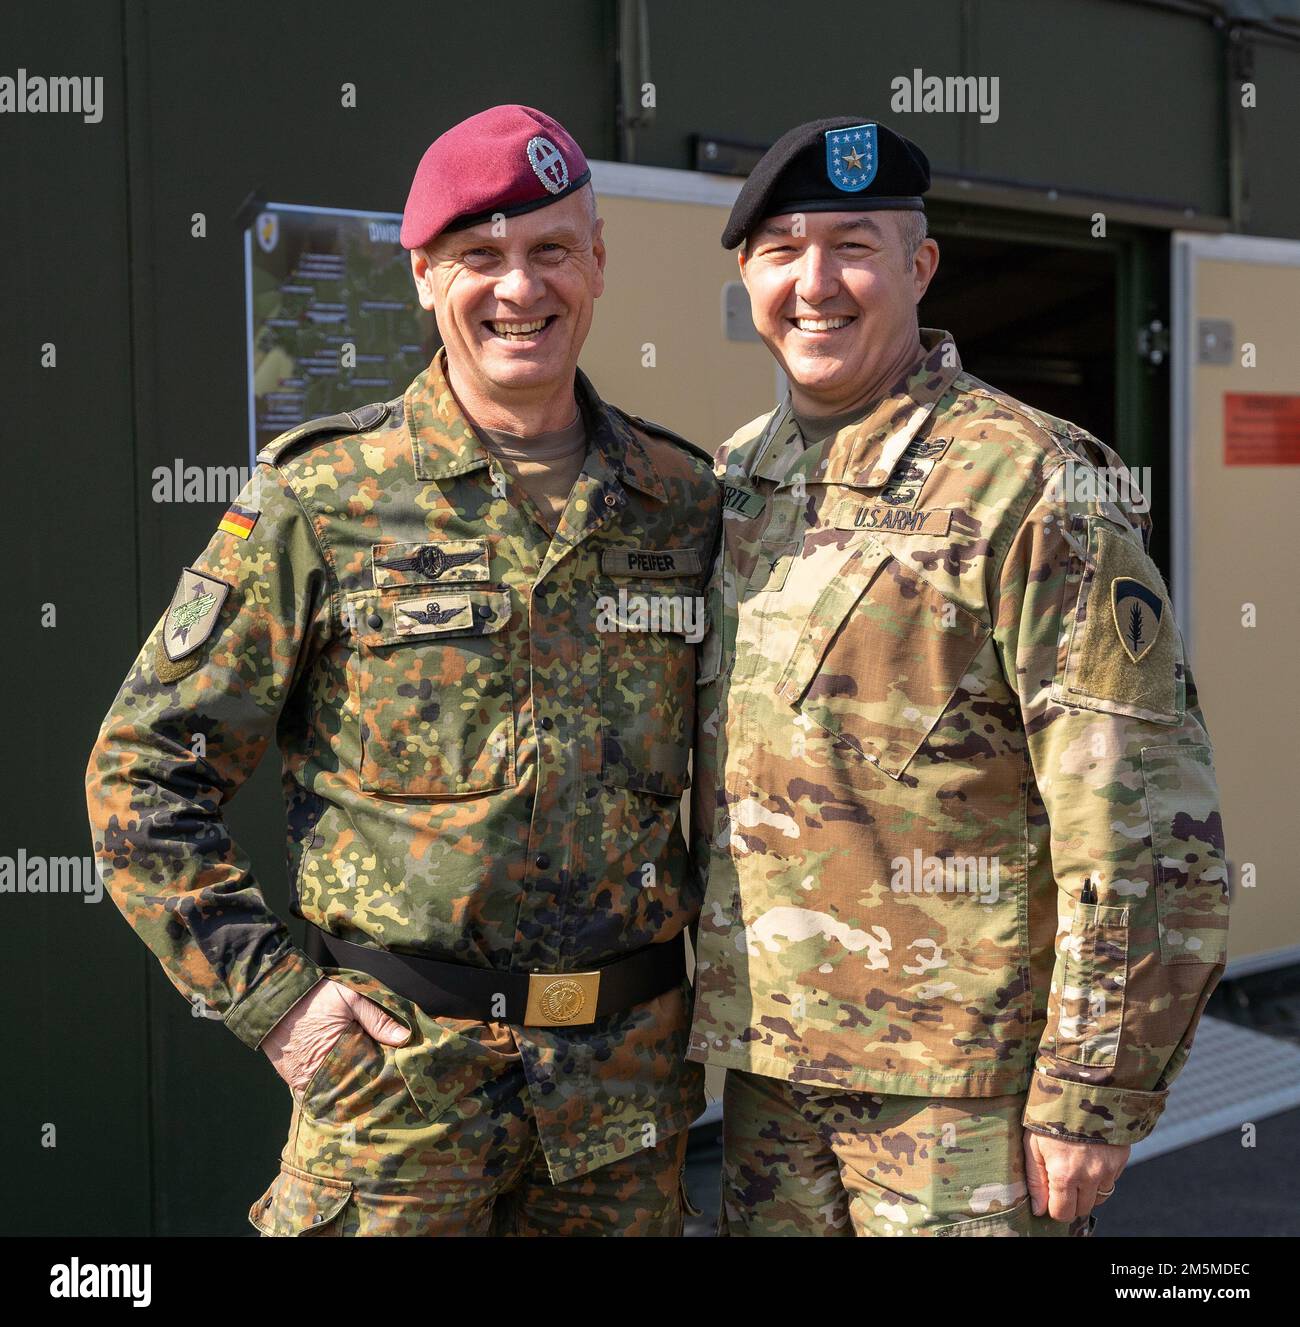 Brig. Gen. Andreas Pfeifer (left), deputy commander, Rapid Response Forces Division, smiles for a photo with Brig. Gen. Jed Schaertl (right), deputy commanding general for mobilization and reserve affairs with the U.S. Army Europe and Africa Command, on the parade ground of Herrenwaldkaserne barracks, Germany, March 25, 2022. The 12th Combat Aviation Brigade was invited to attend the change of command for the Rapid Response Forces Division. 12 CAB is among other units assigned to V Corps, America's Forward Deployed Corps in Europe that works alongside NATO Allies and regional security partners Stock Photo